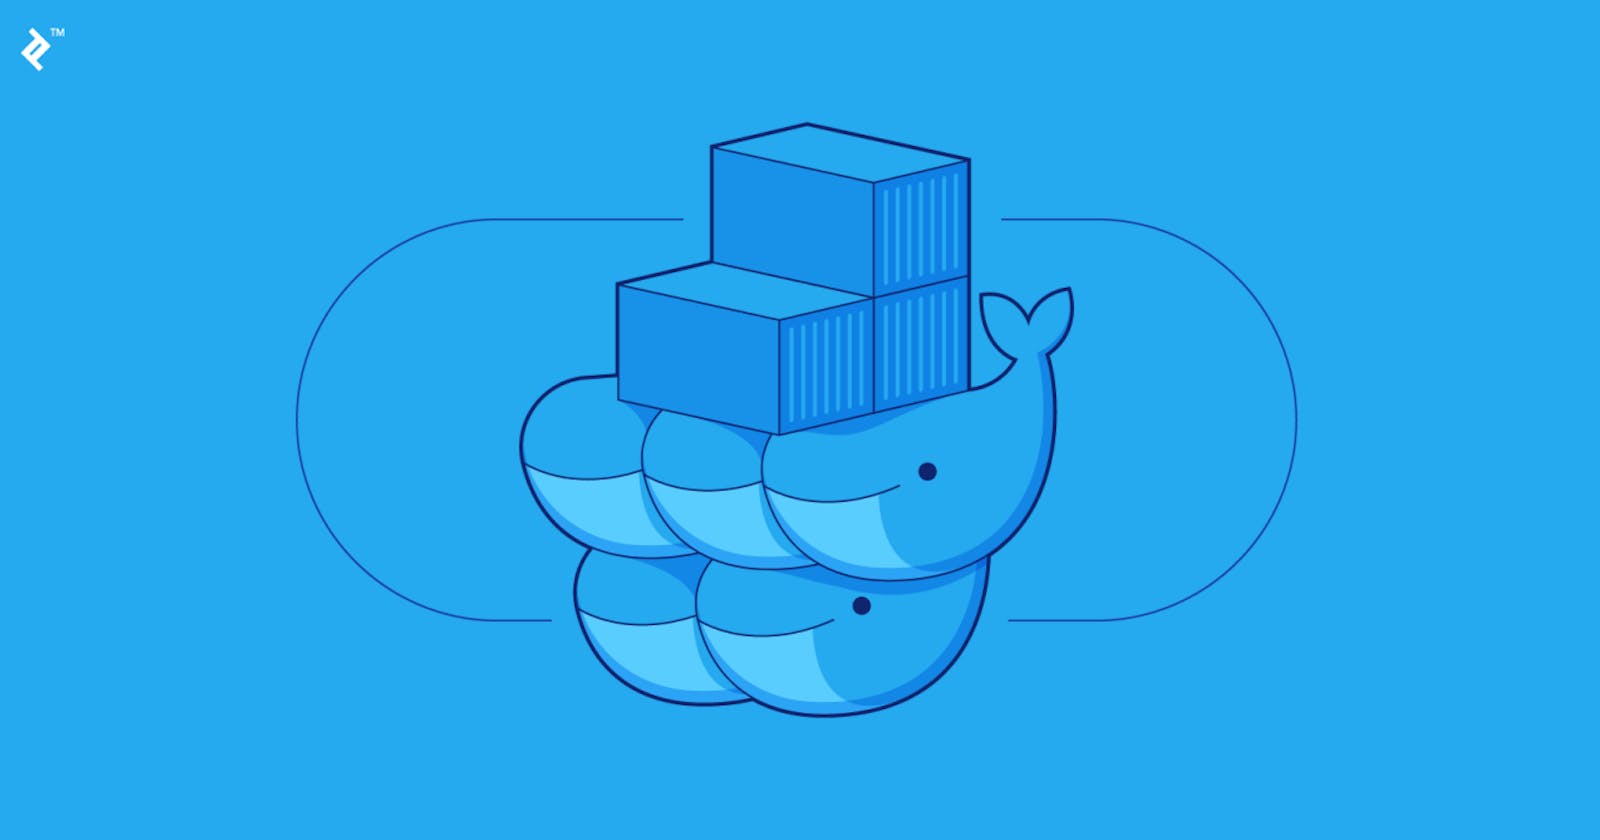 Day 83 Project-4: Deploying Web Application with Docker Swarm 🐳